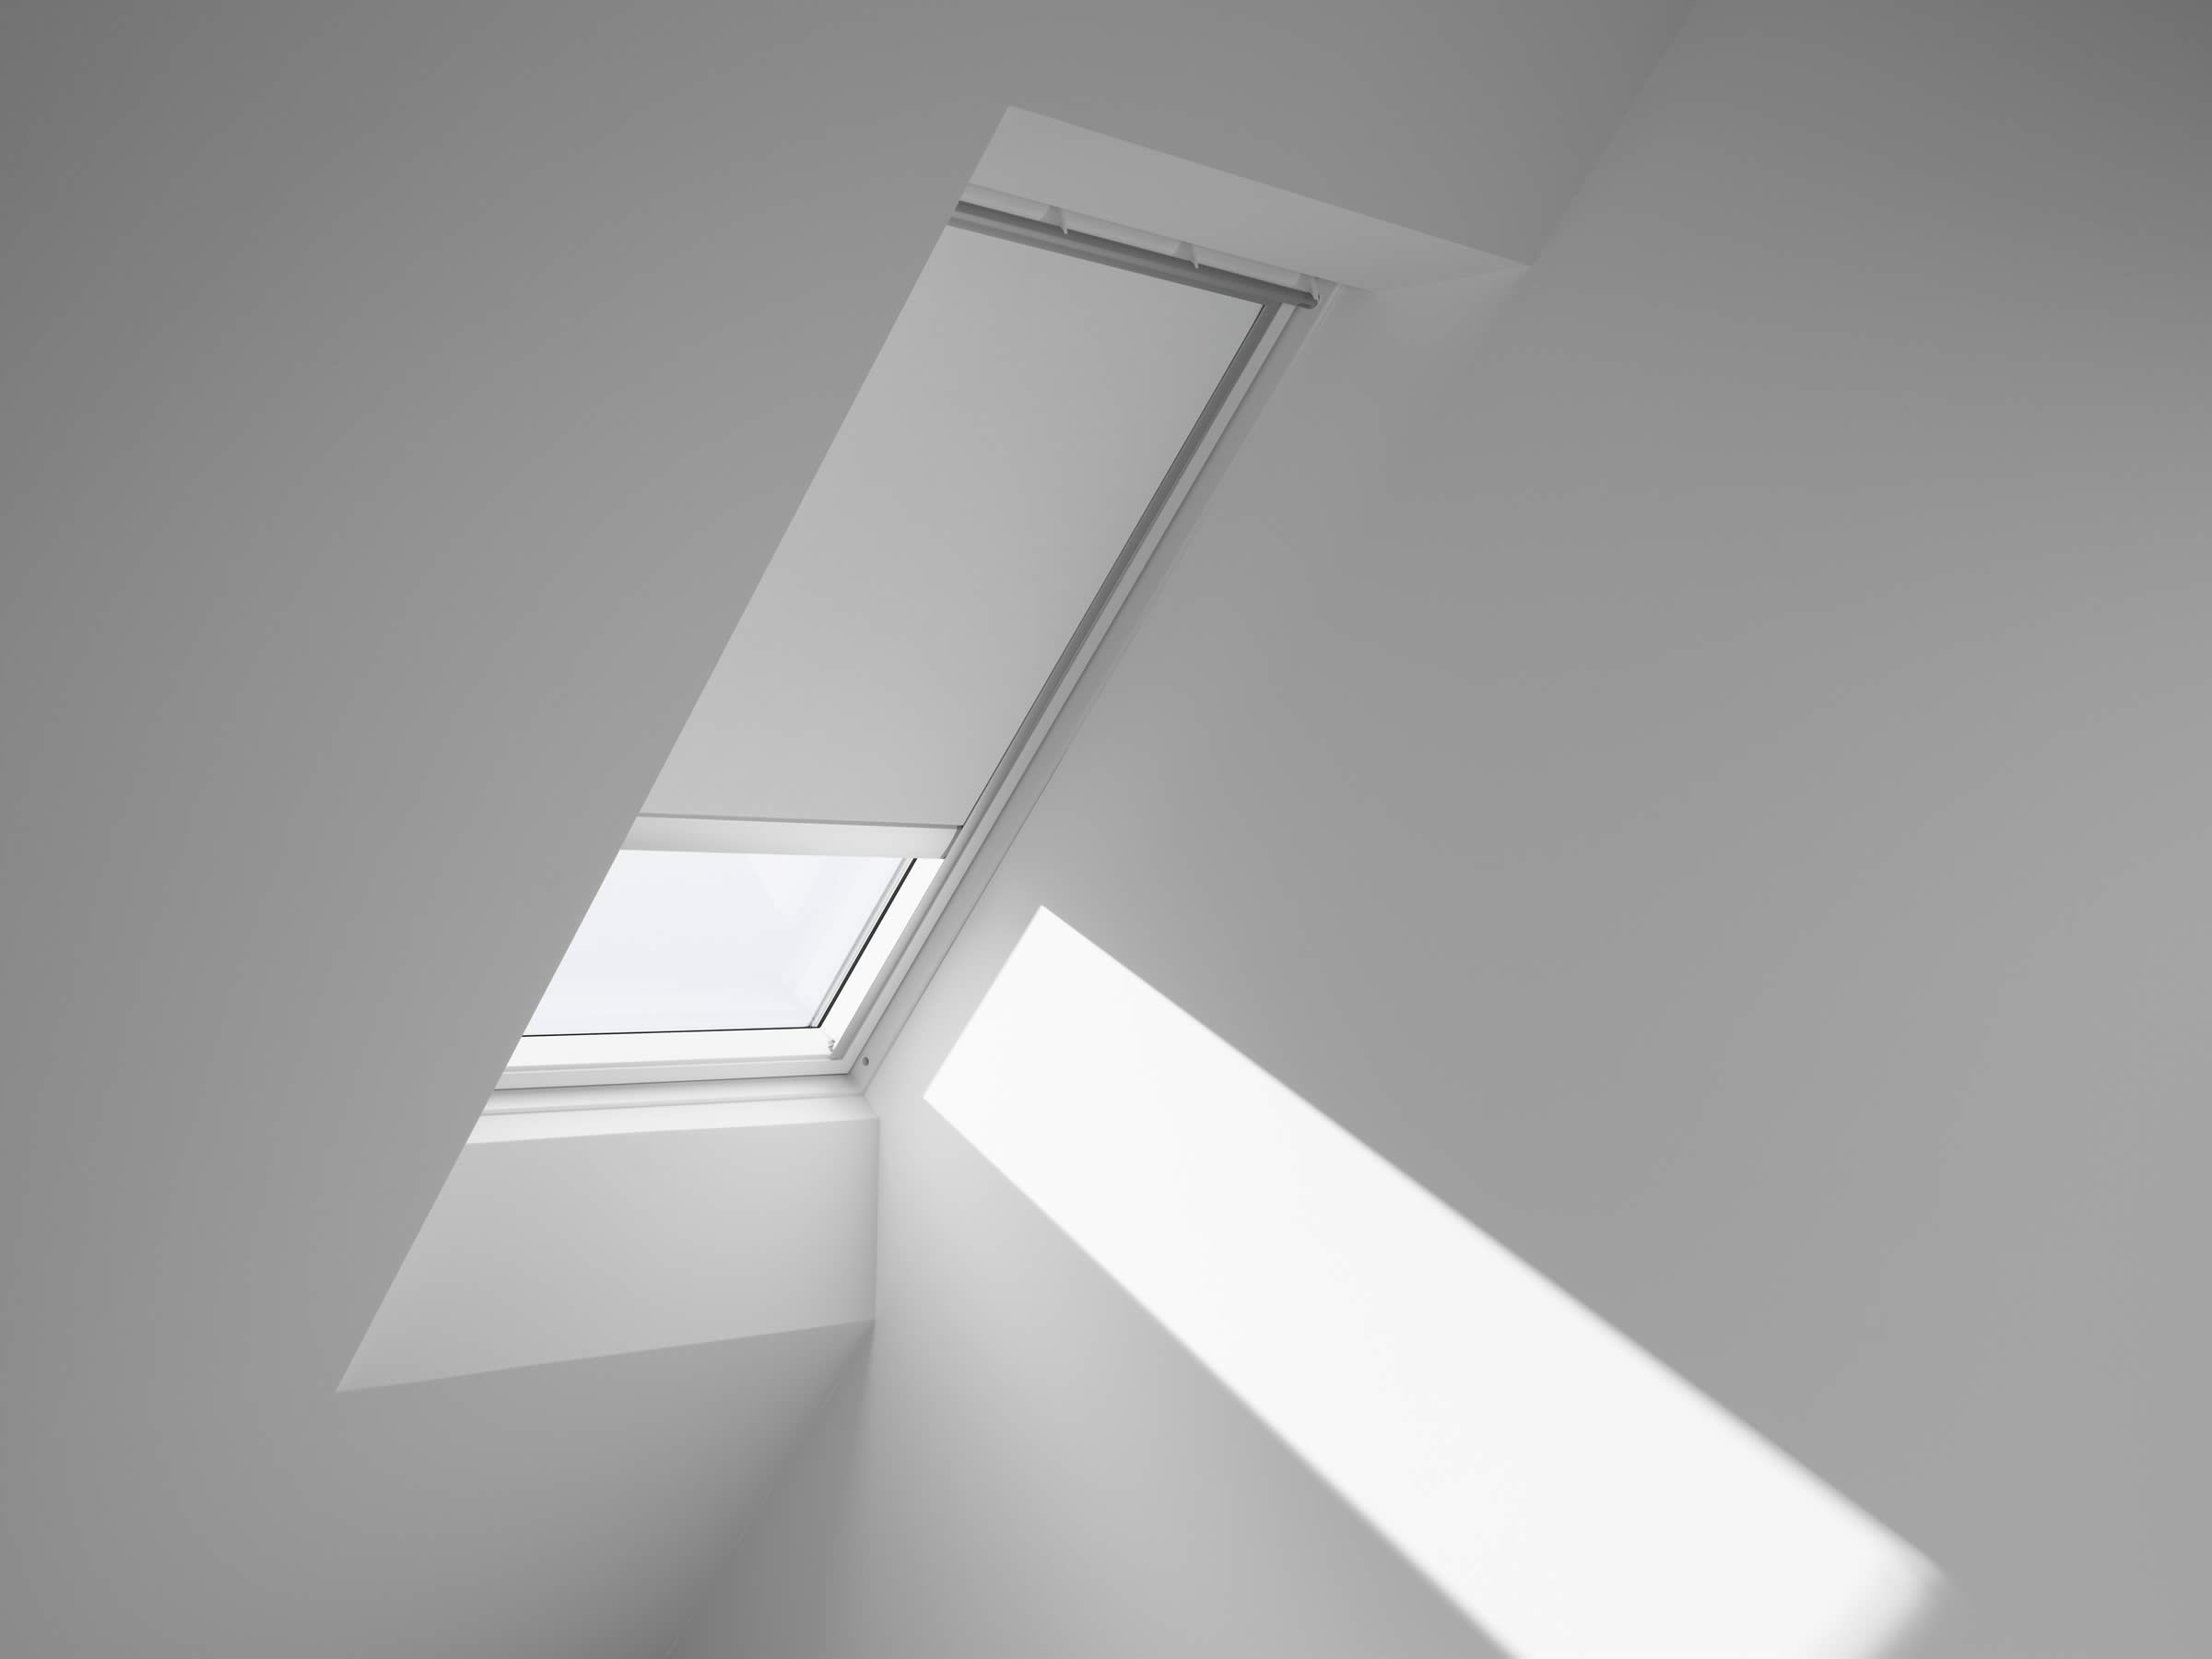 Velux skylight with blind